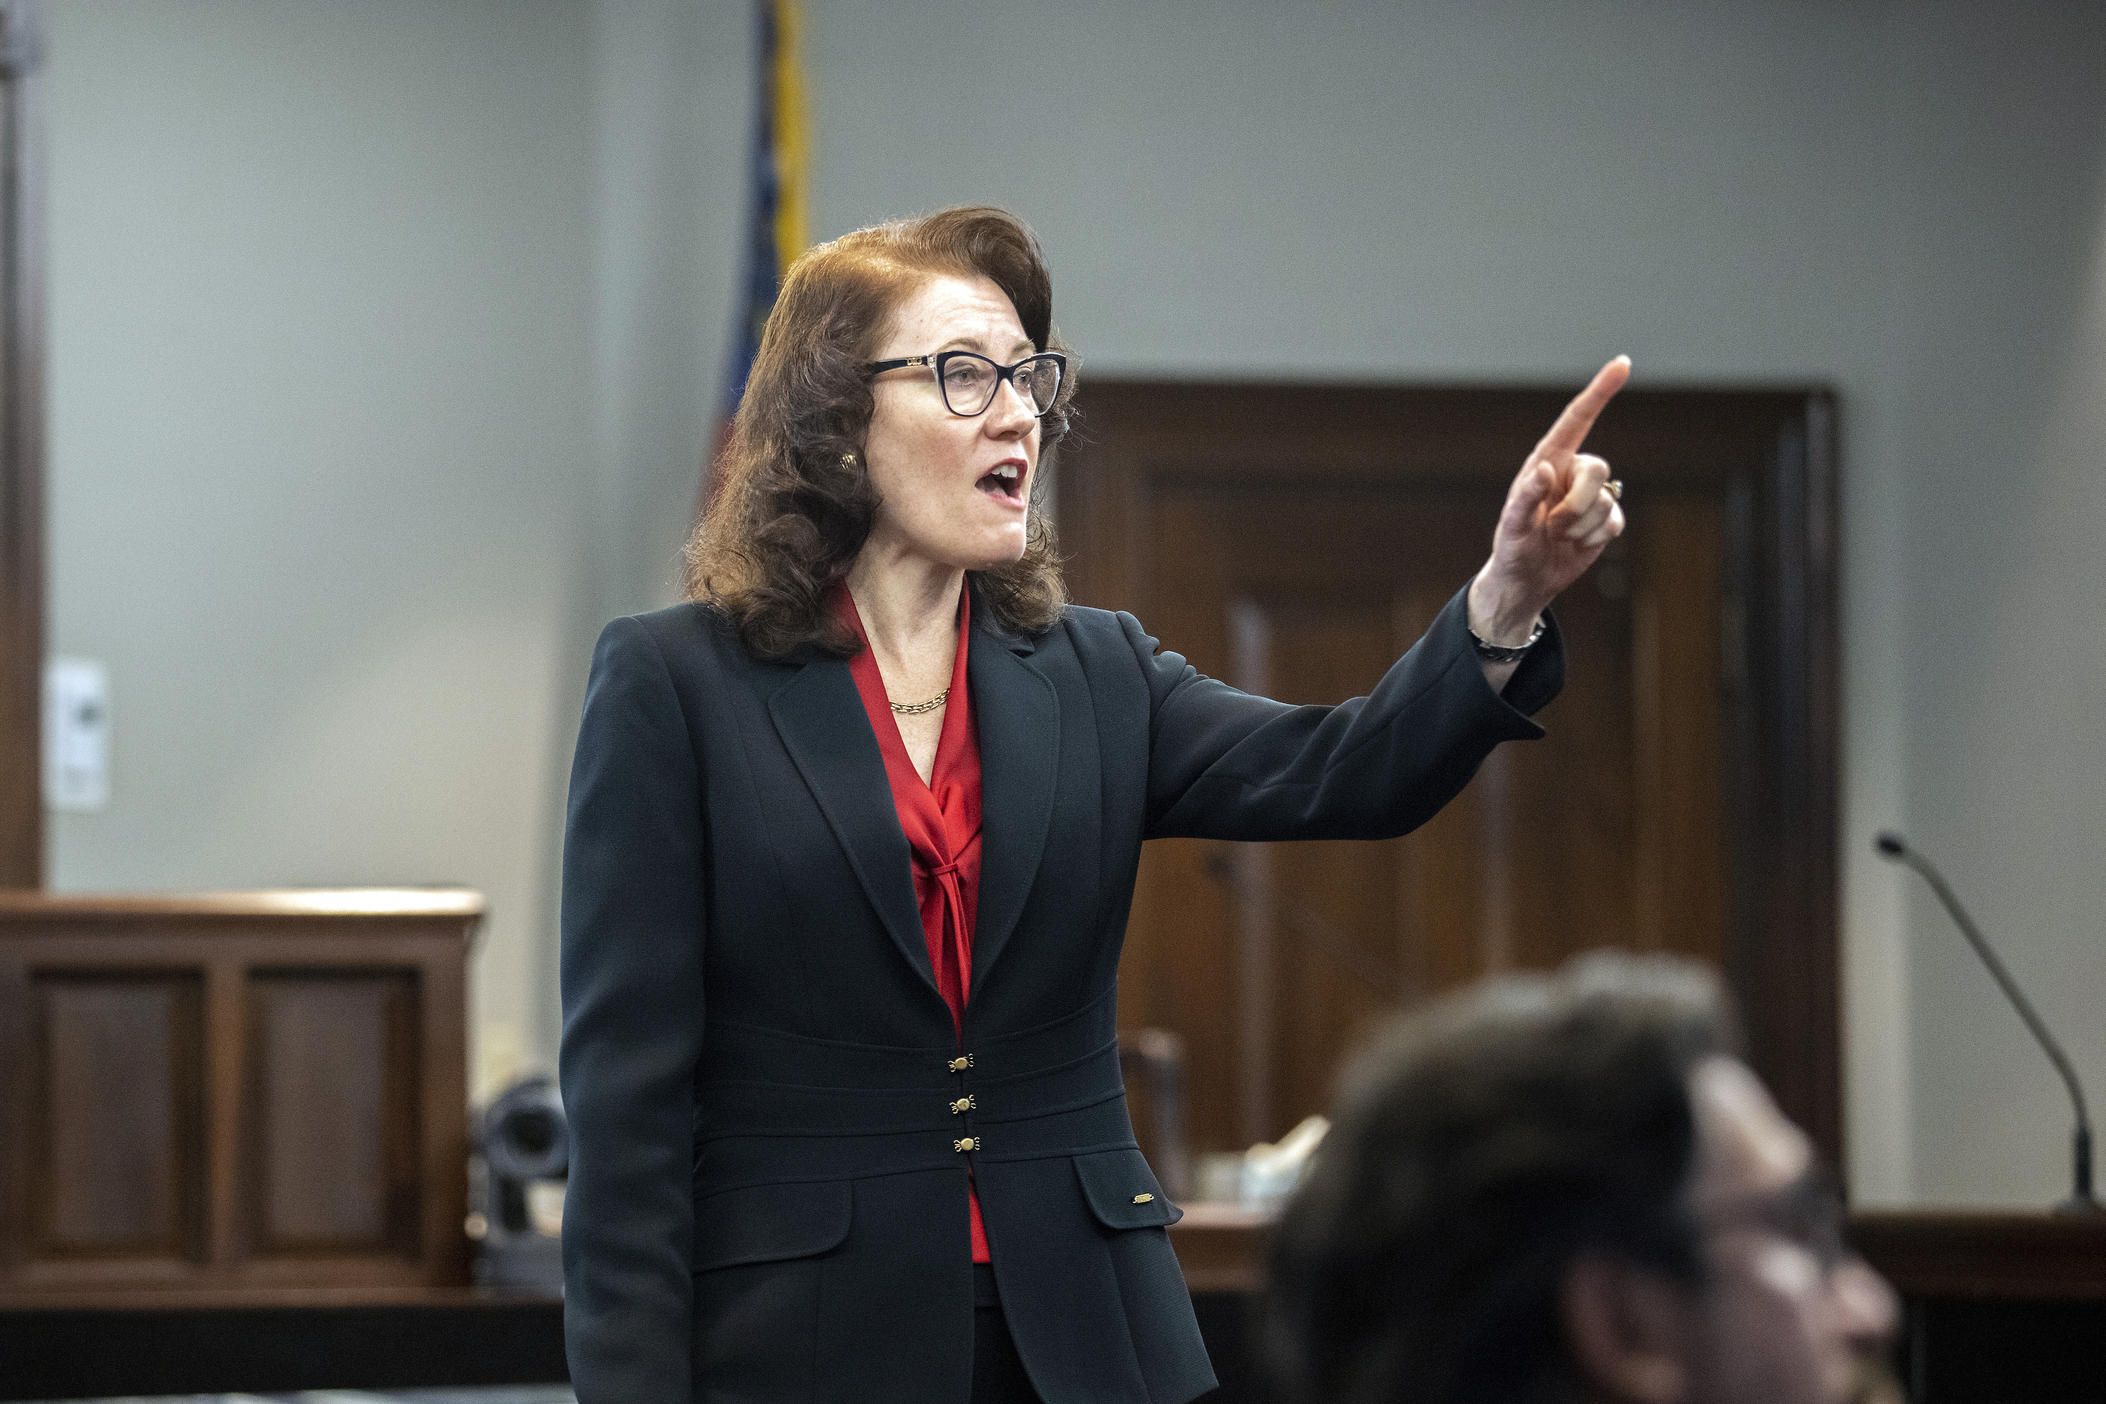 Prosecutor Linda Dunikoski presents a closing argument to the jury during the trial of Travis McMichael, his father, Gregory McMichael, and William "Roddie" Bryan, at the Glynn County Courthouse, Monday, Nov. 22, 2021, in Brunswick, Ga.